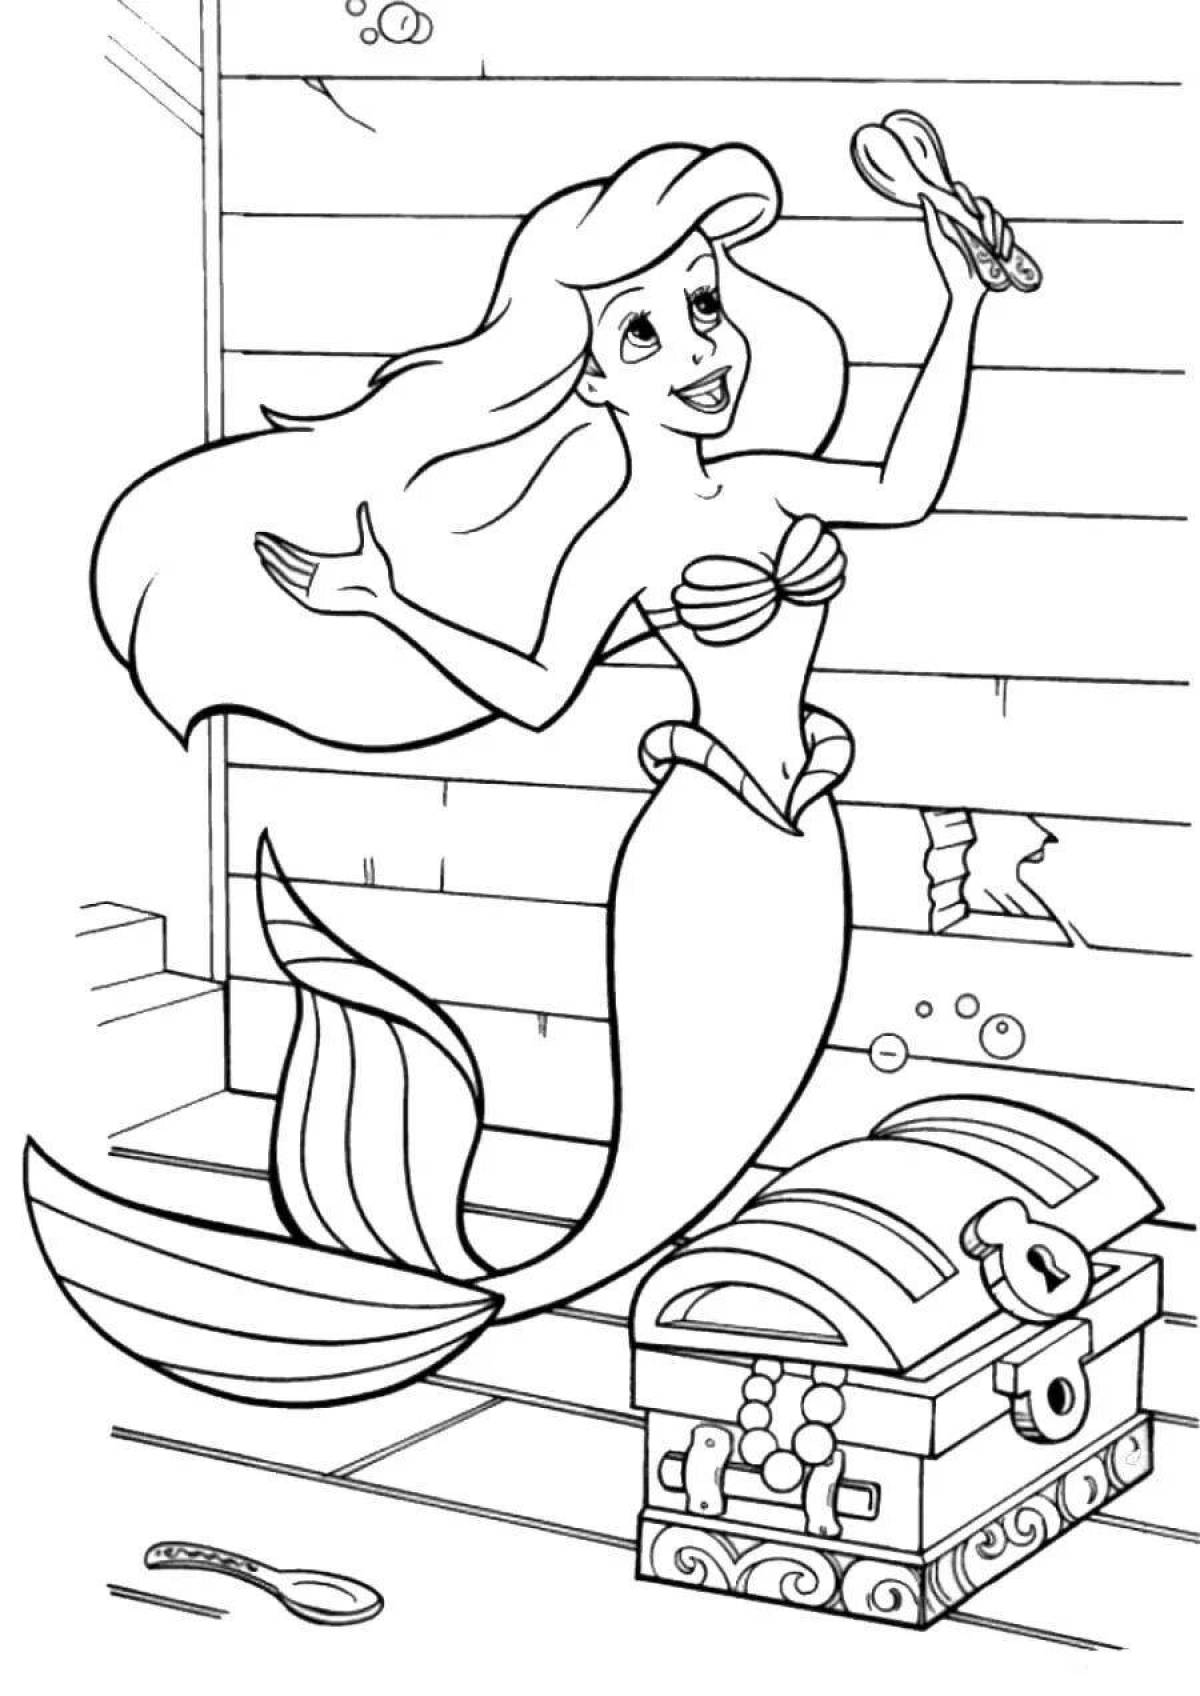 Charming ariel coloring book for kids